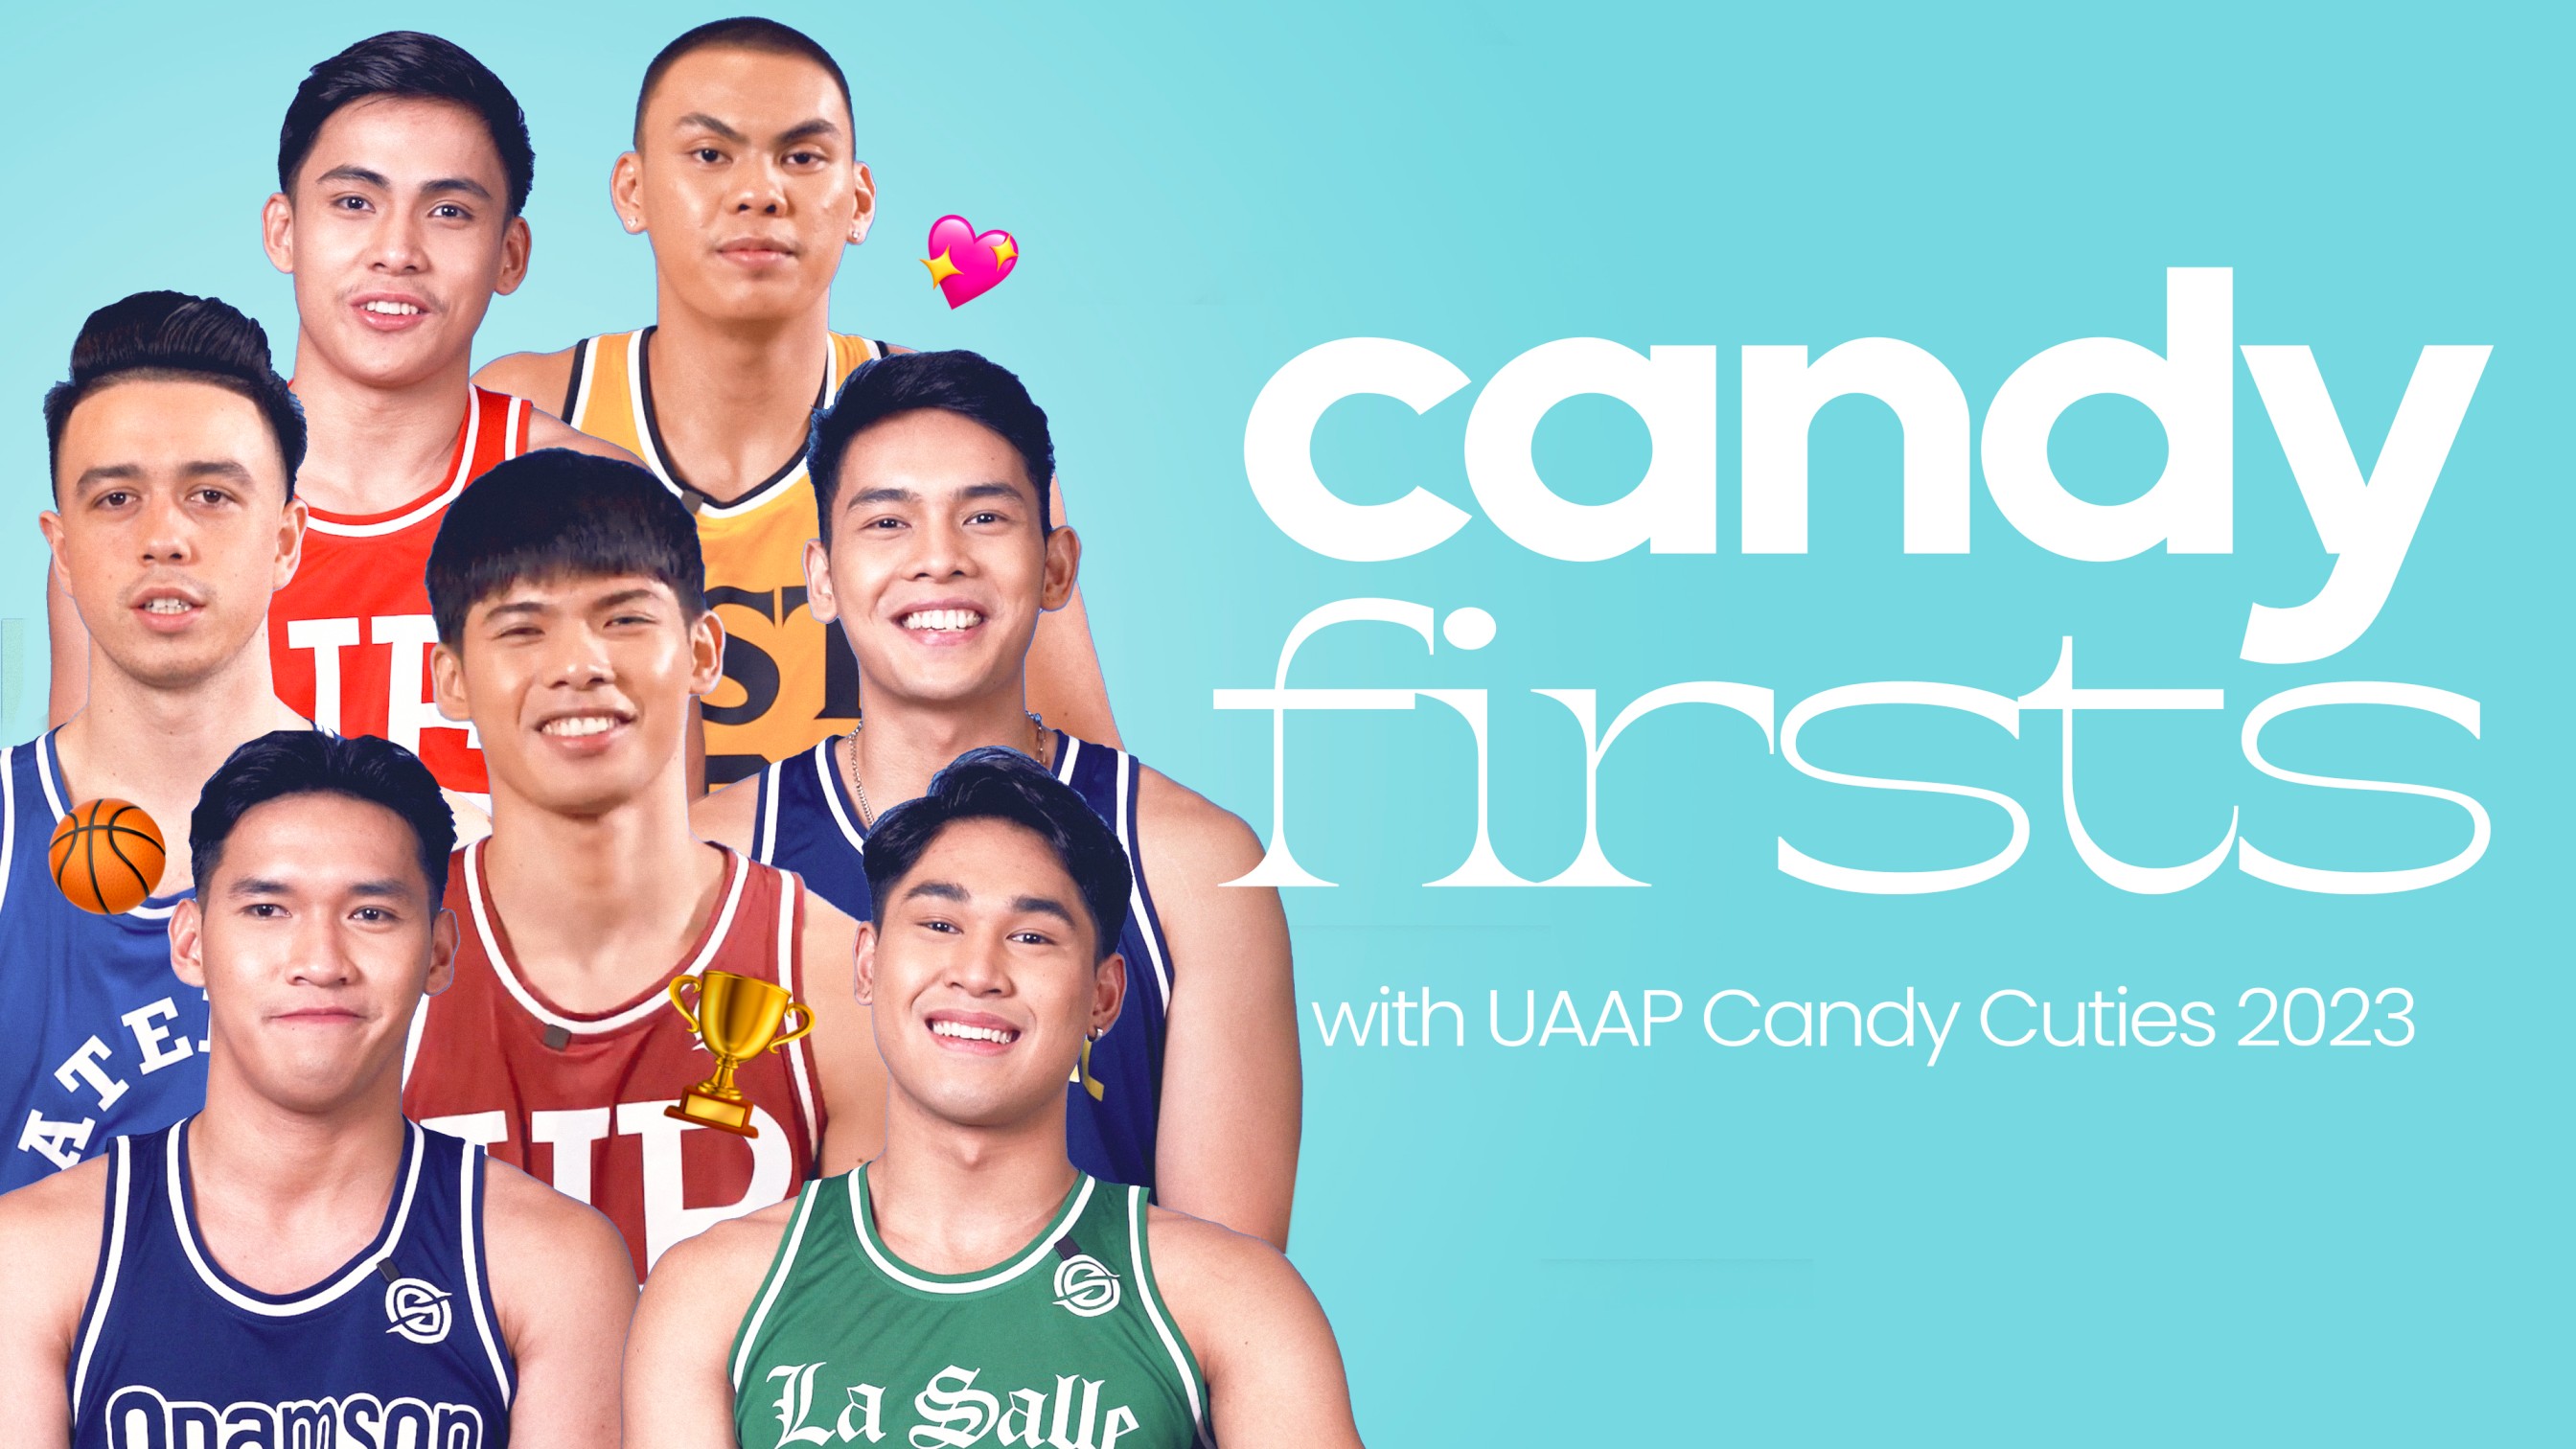 Wow, This Candy Cutie Reveals that He Started Playing Basketball At *Just* 11 Years Old